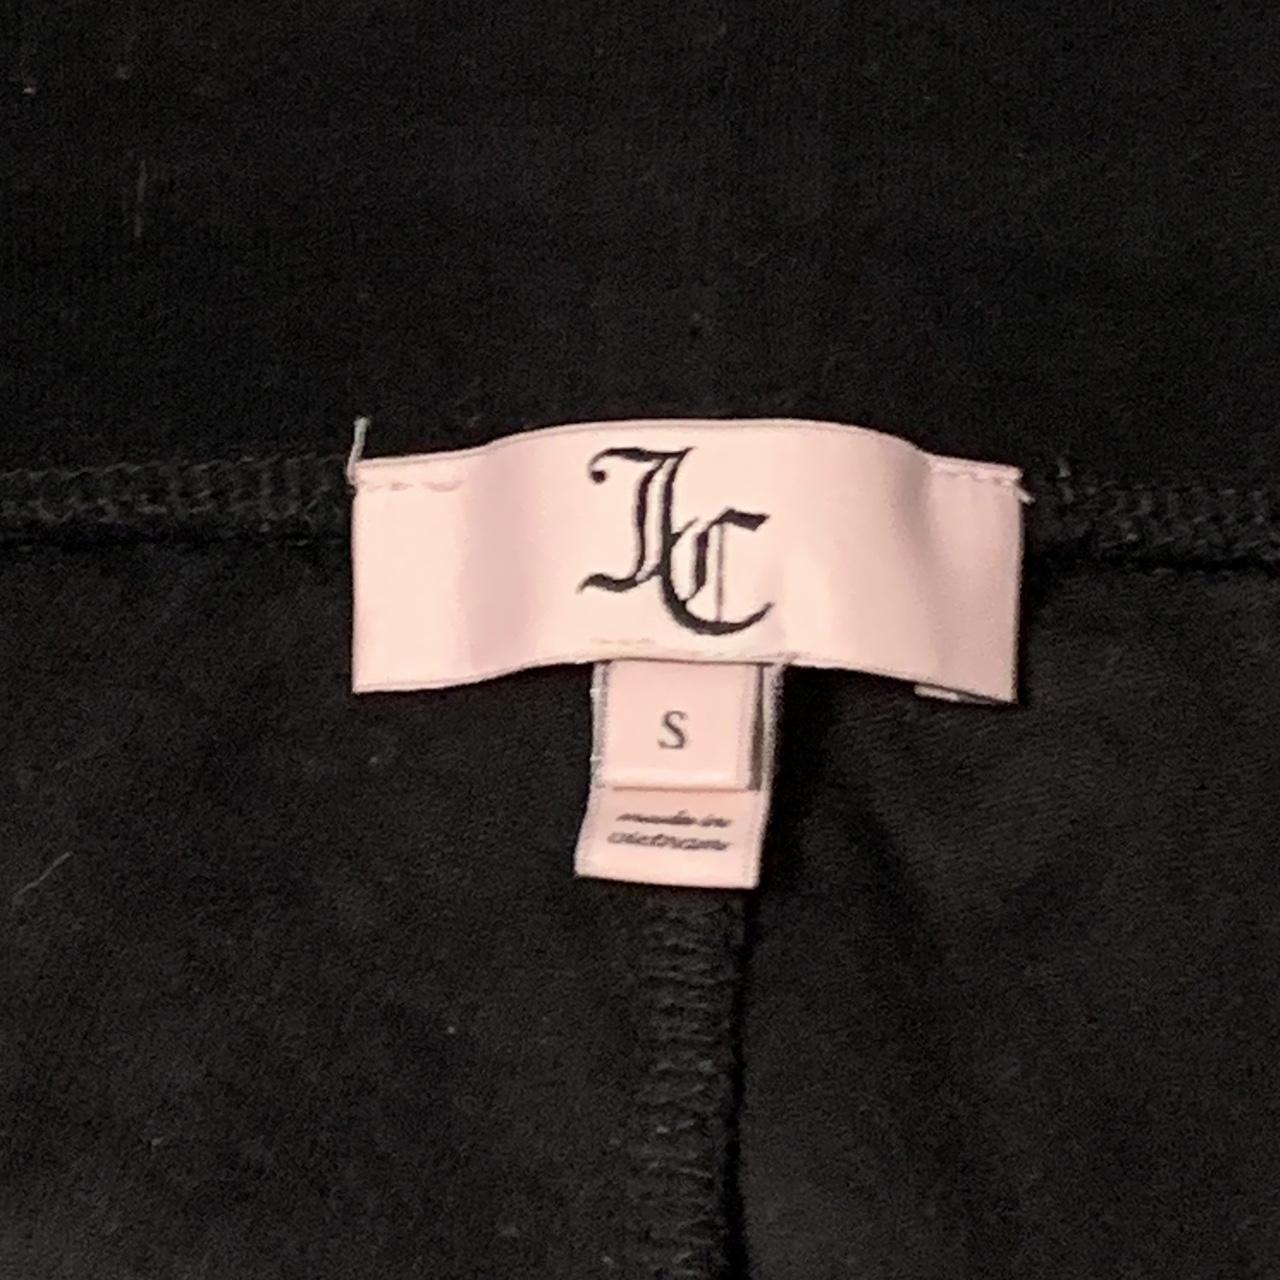 Juicy Couture Terry Cloth Pants Size Small... - Depop